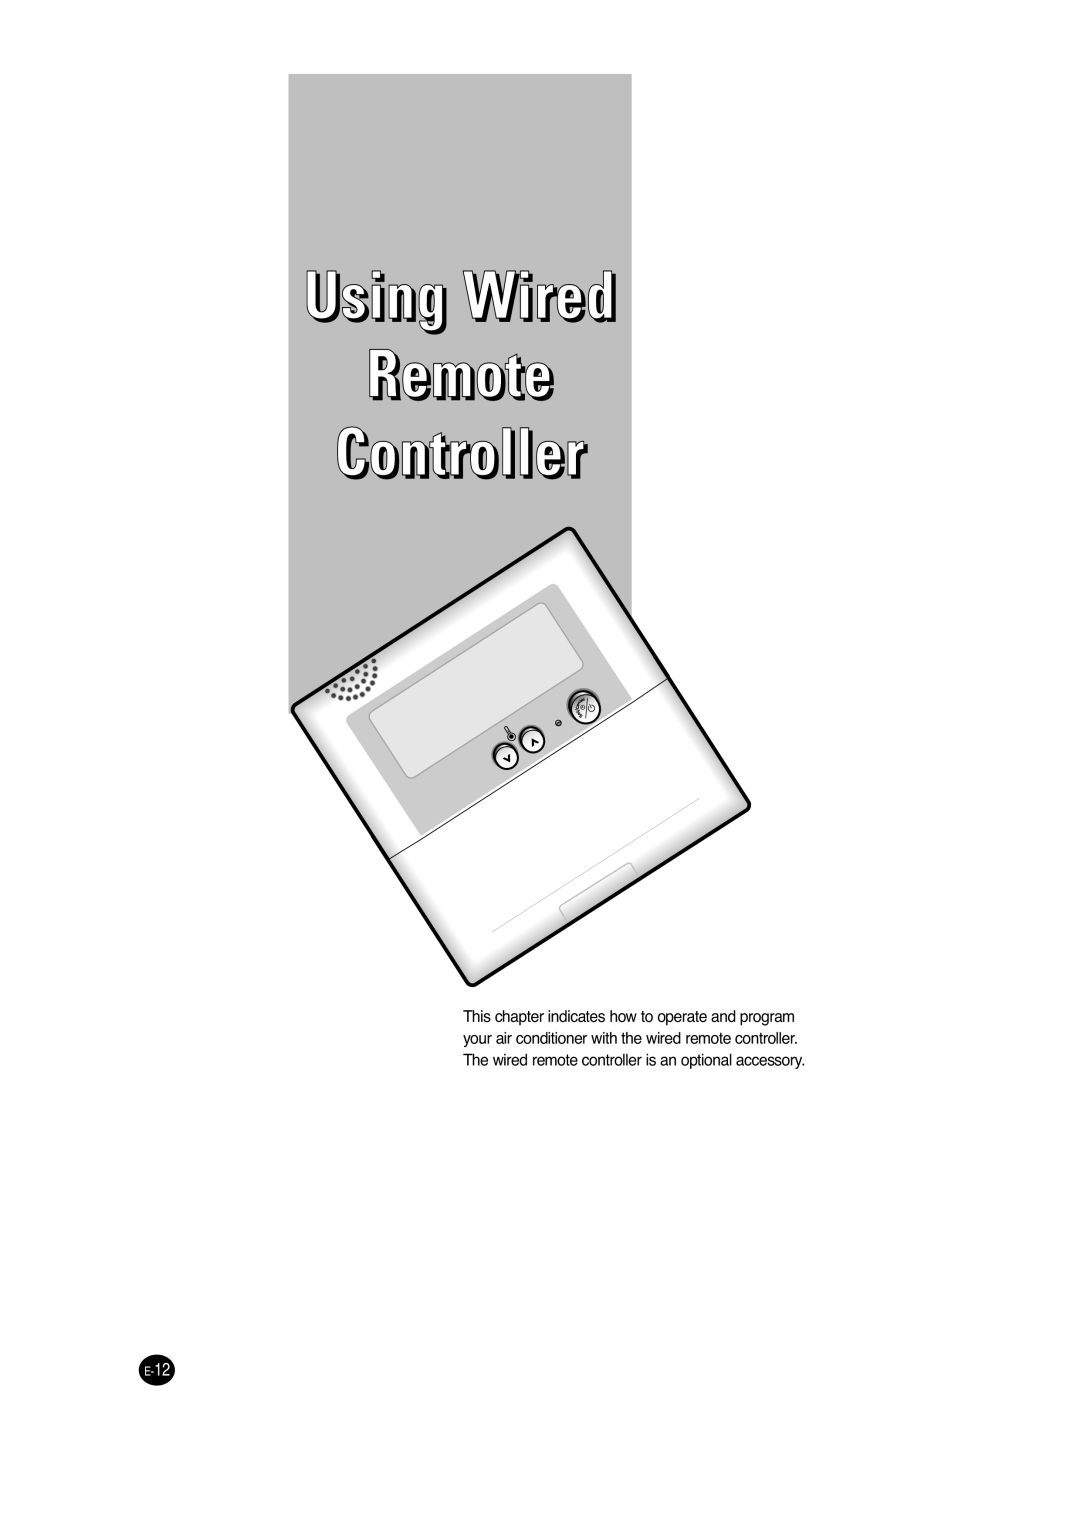 Samsung UCC2800C, UCC2400C, ACC2800C, ACC2400C installation manual Using Wired Remote Controller, E-12 